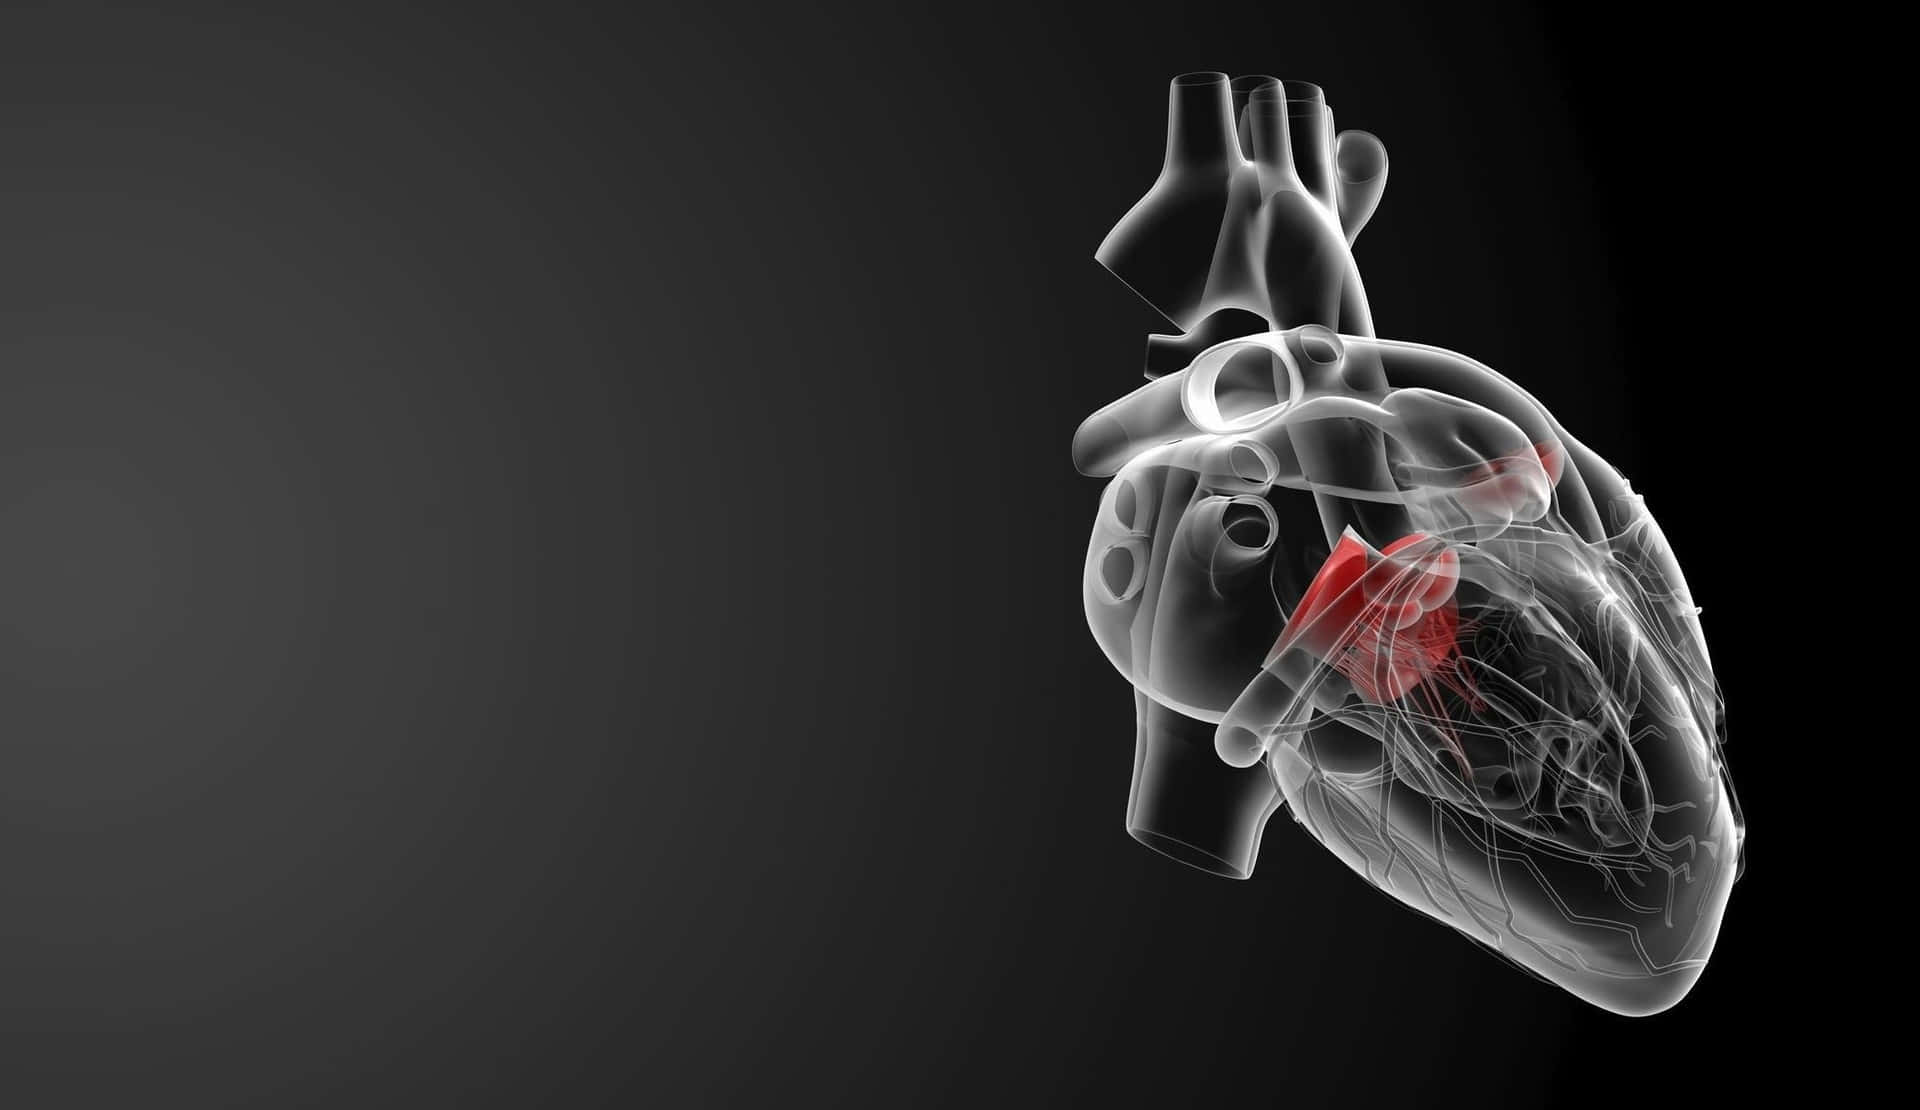 Black And White Human Heart Hd Medical Background